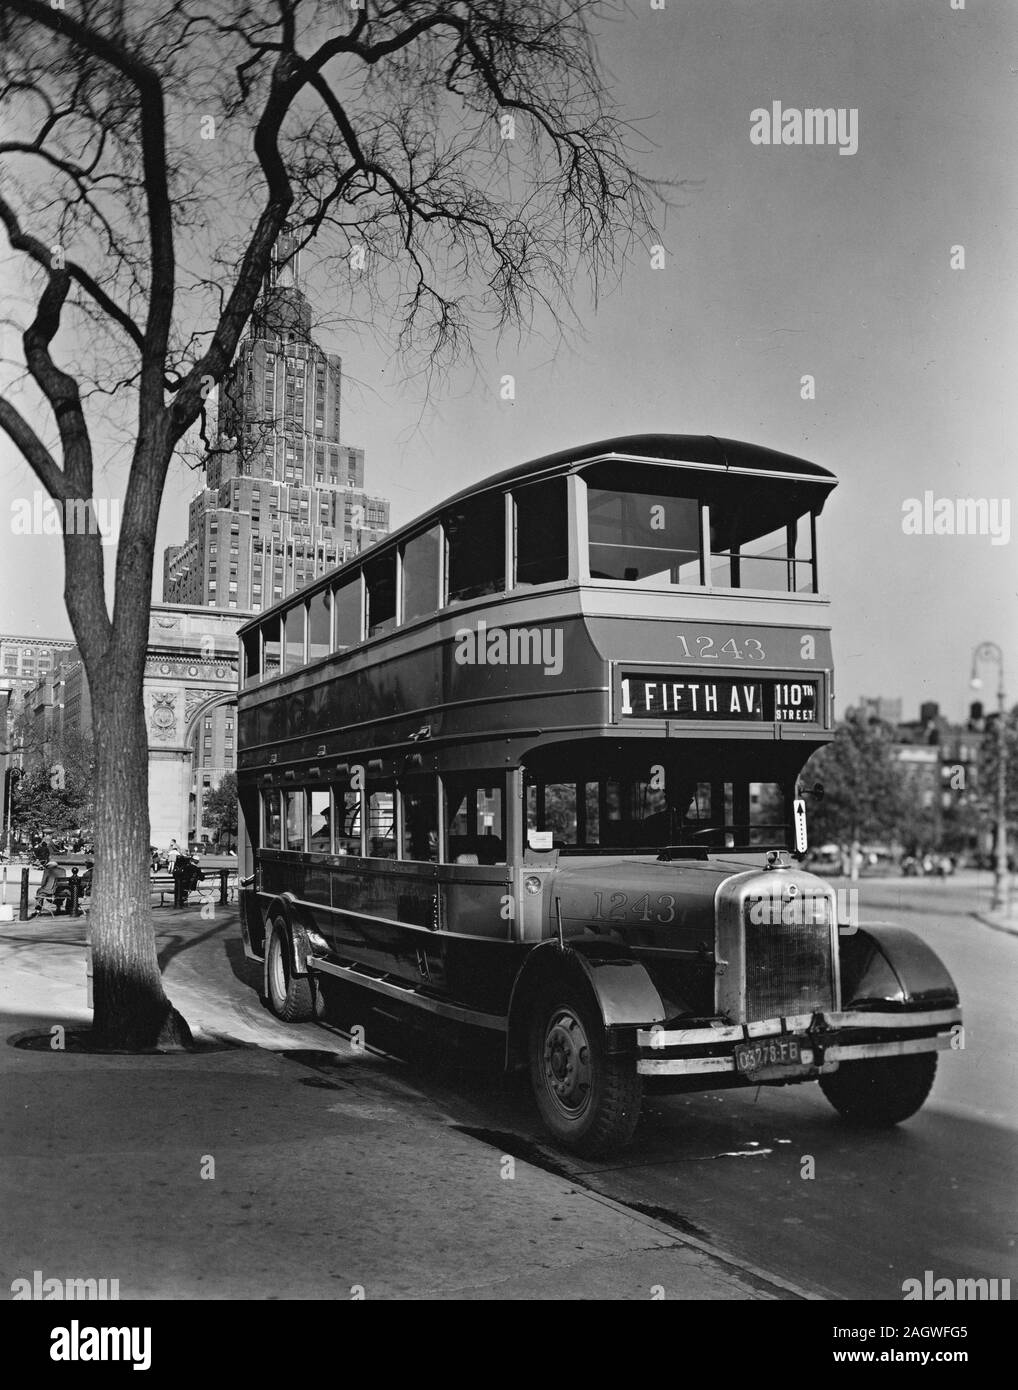 Double-decker bus parked by tree in Washington Square, the arch and 1 Fifth Avenue (apartments) visible beyond. Stock Photo